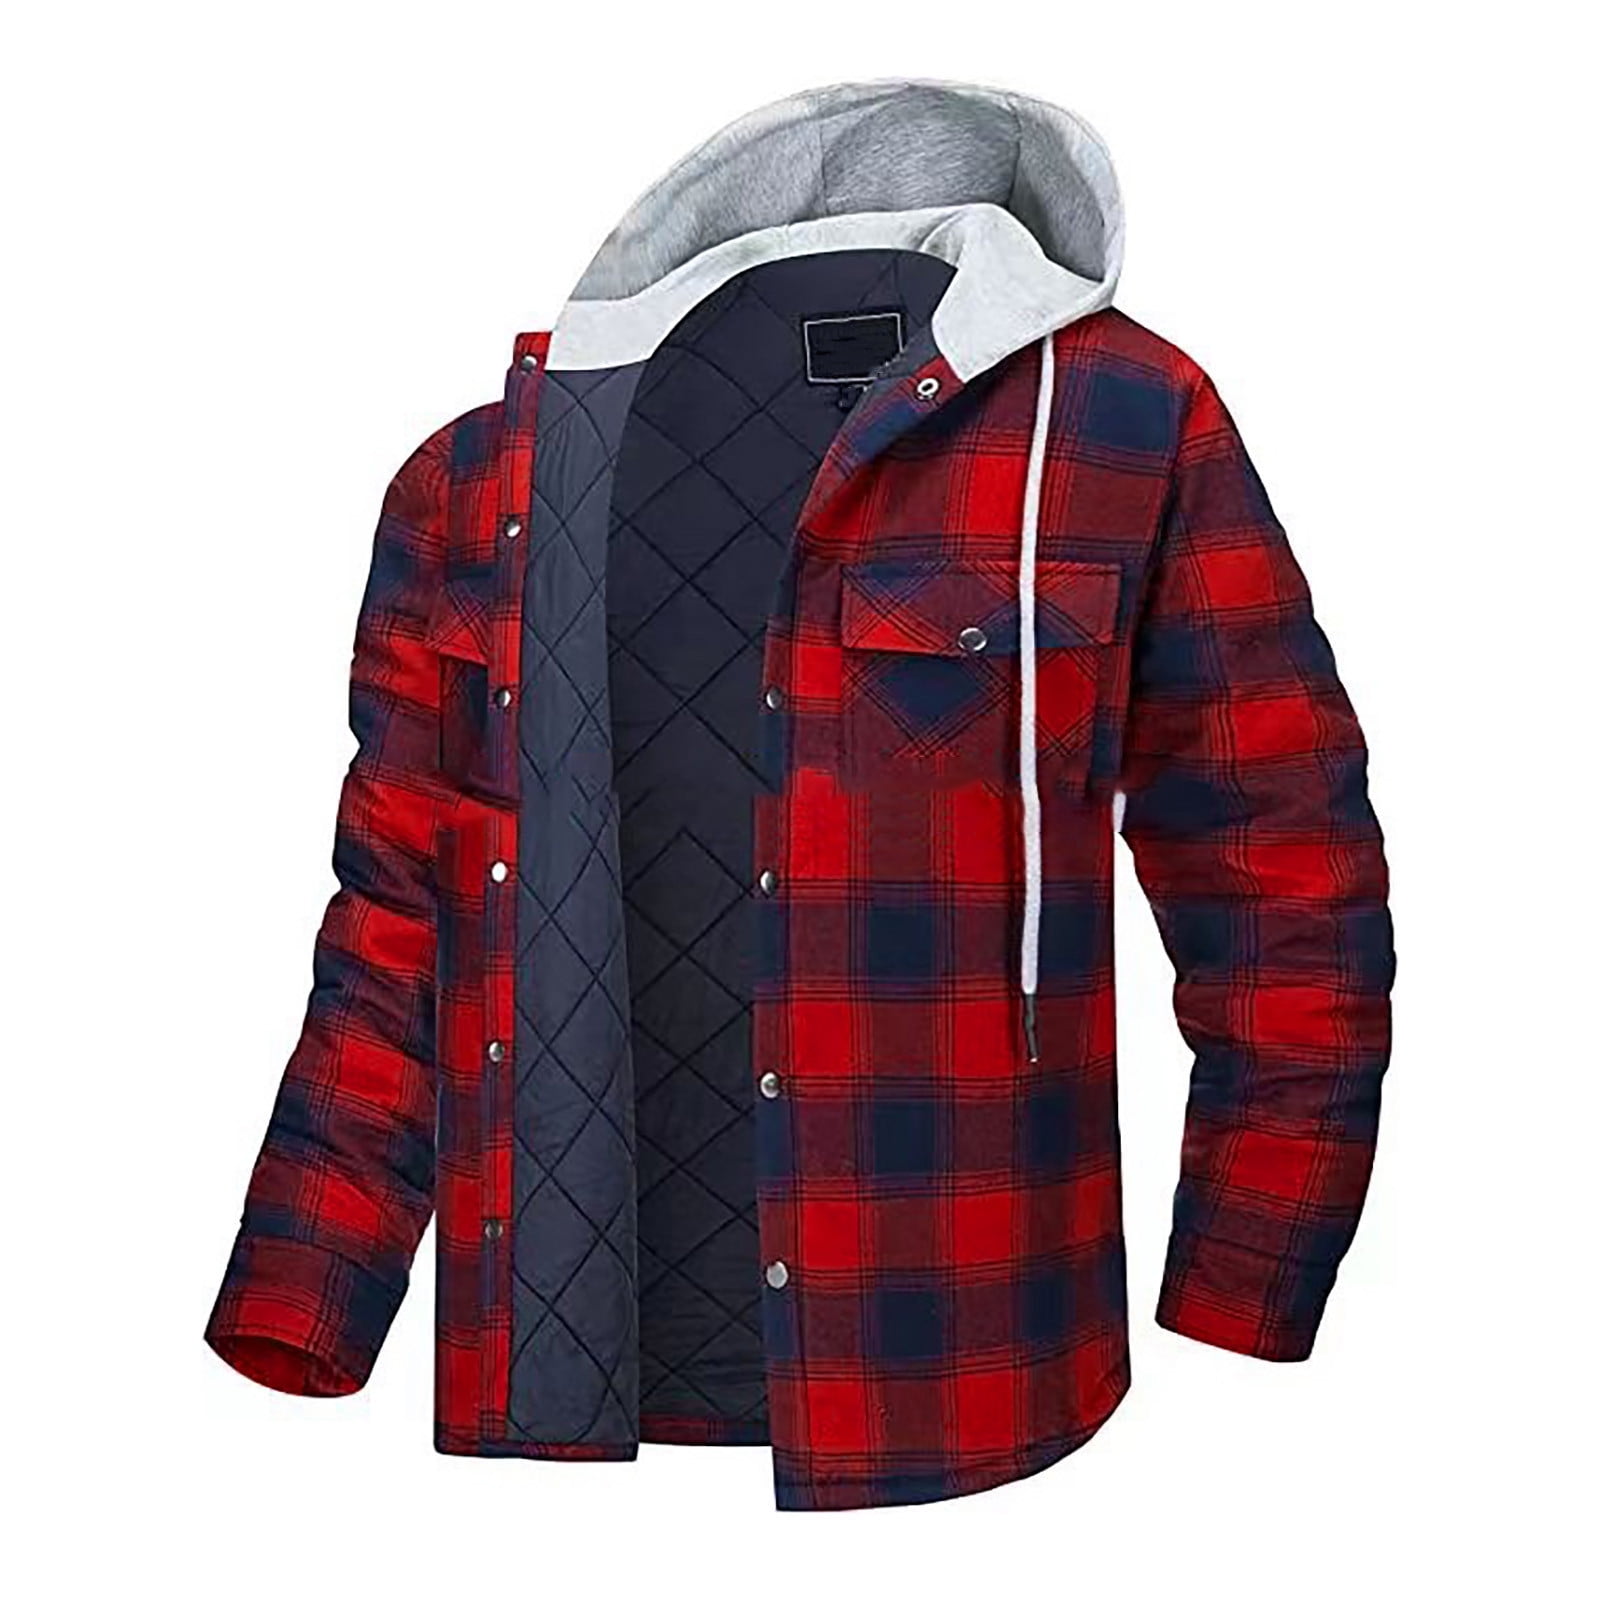 Men's Long Sleeve Lined Flannel Shirt Jacket with Hood Men's Cotton ...